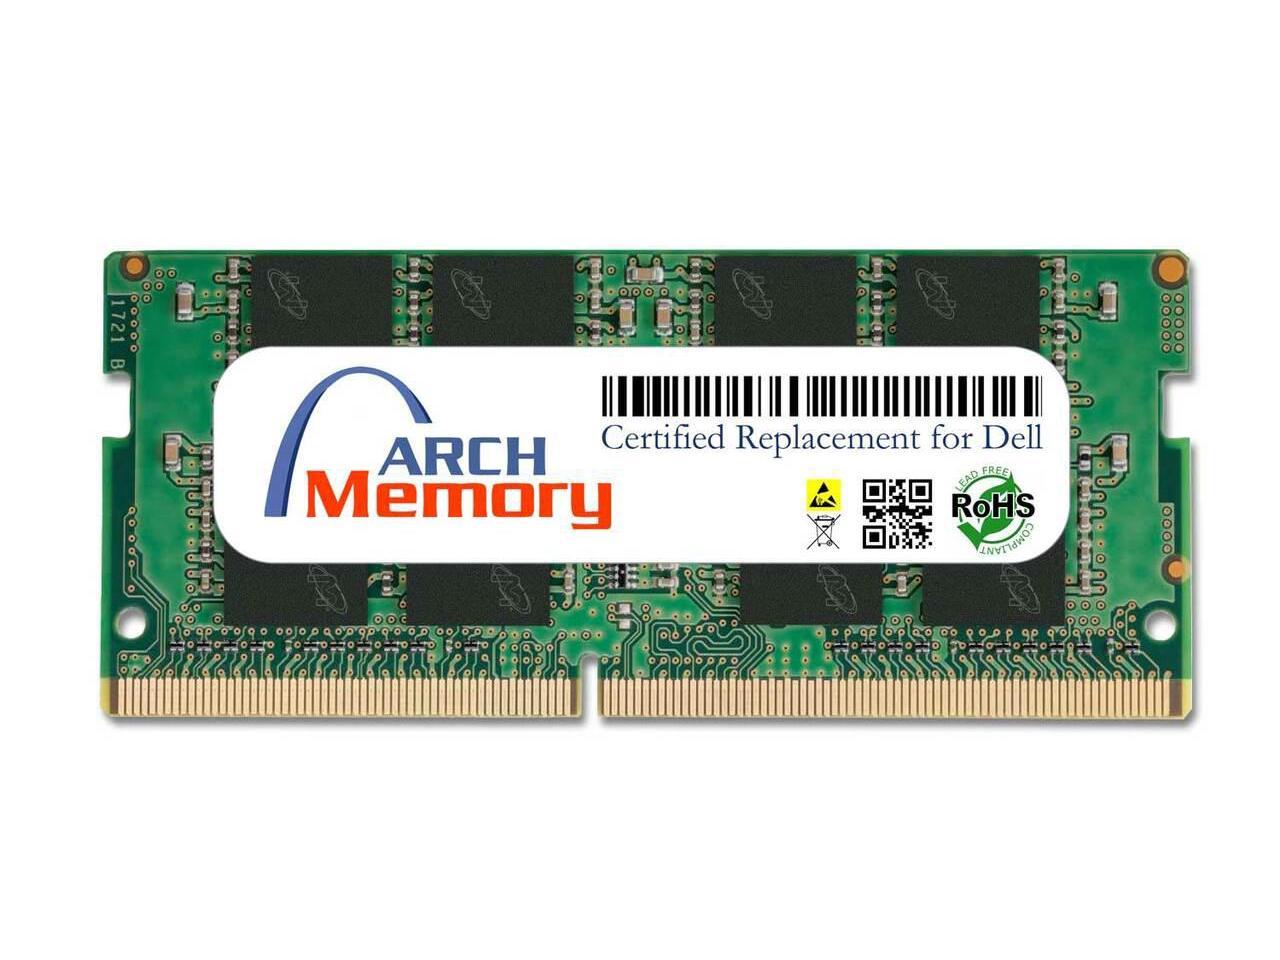 OUTLET 包装 即日発送 代引無料 A-TECH A-Tech 16GB Memory RAM for Dell Latitude 5410  DDR4 3200MHz PC4-25600 Non